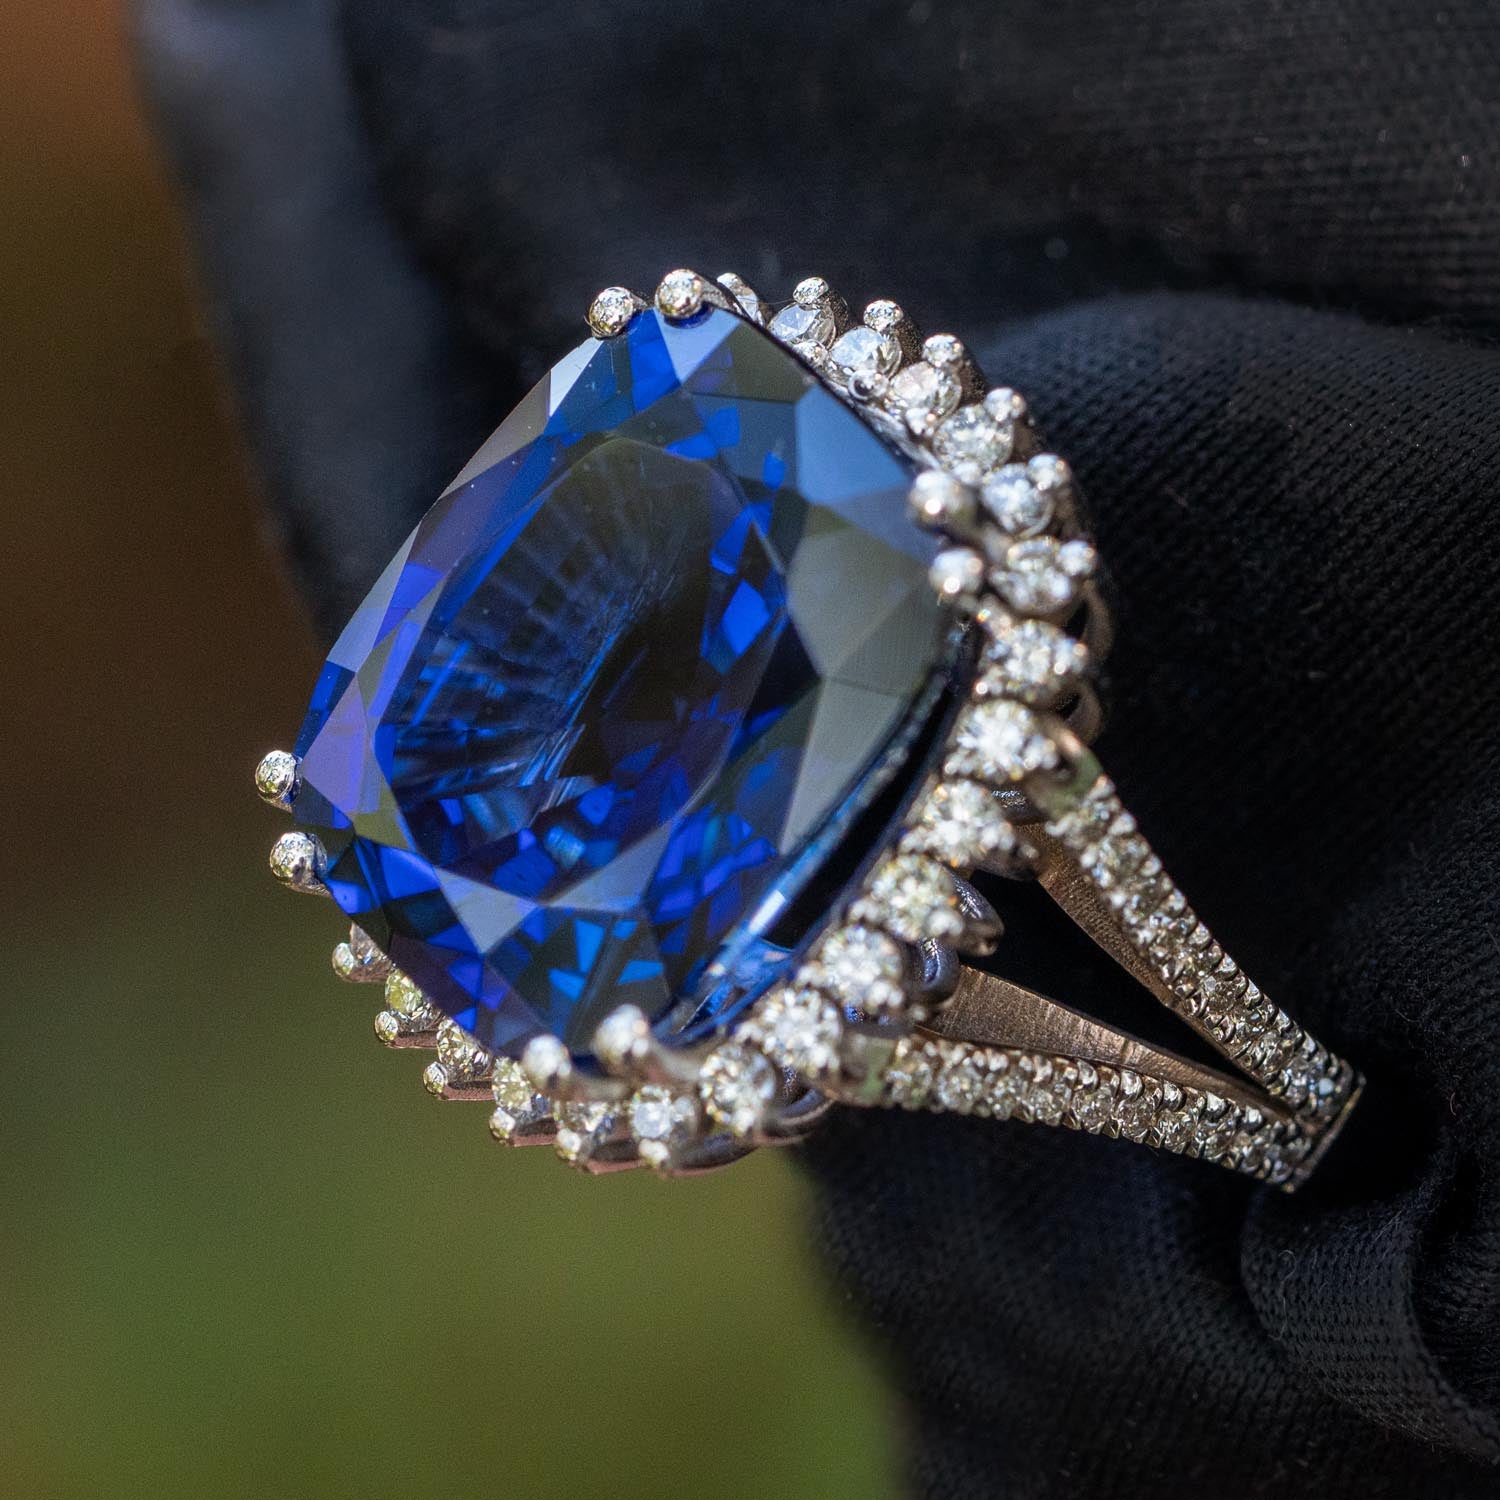 Big Sapphire Ring, Kate Middleton Sapphire And Diamond Wed… | Flickr